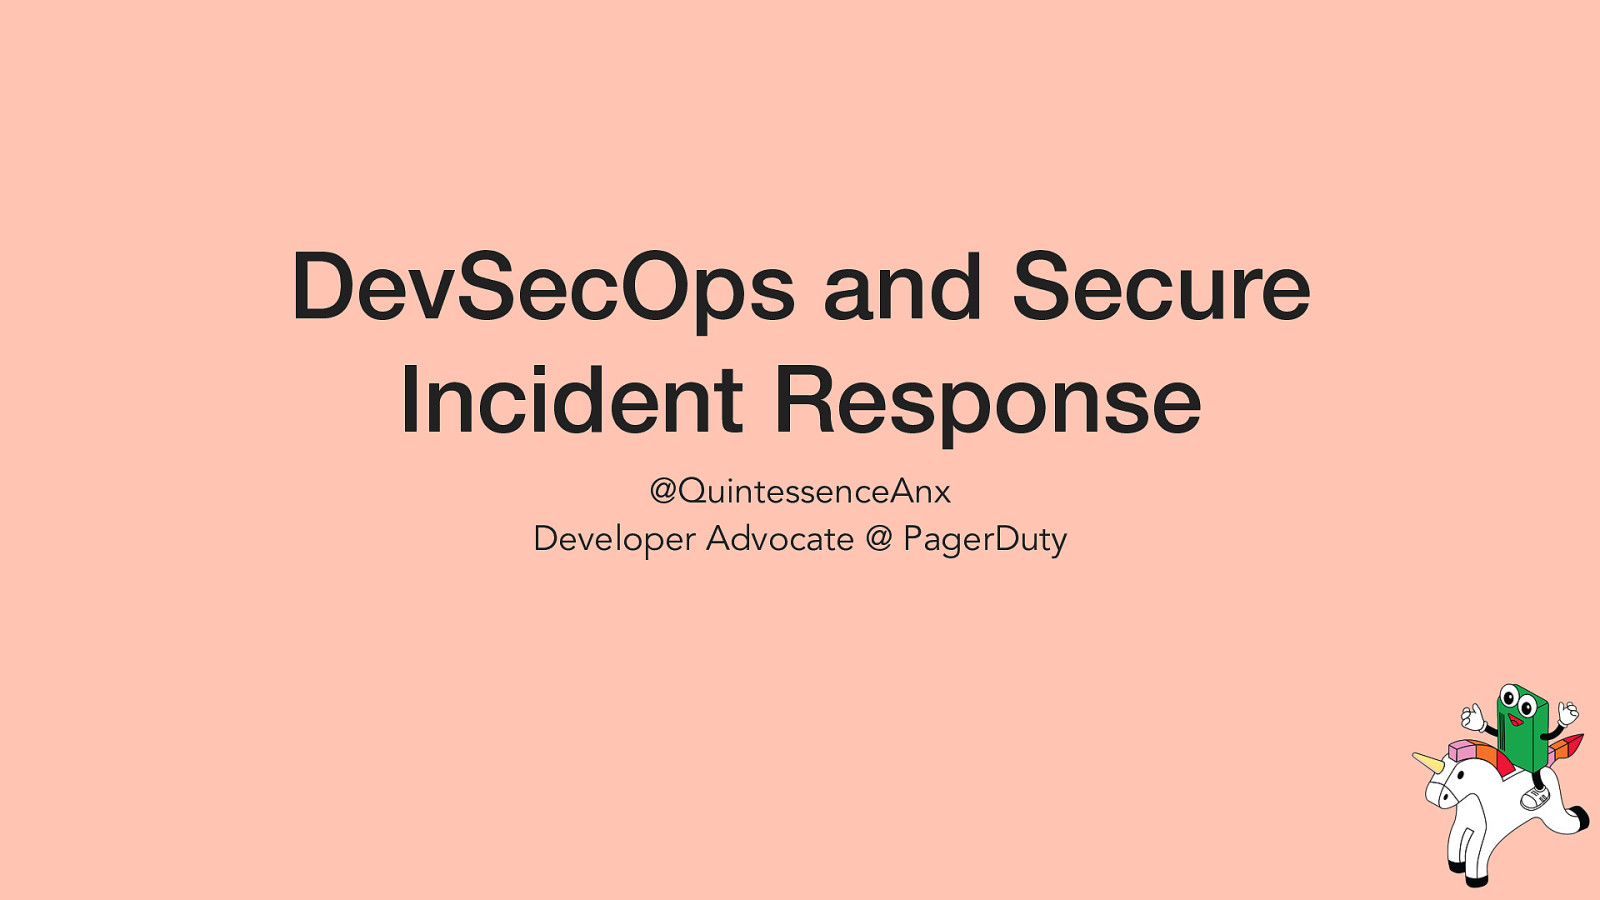 DevSecOps and Secure Incident Response